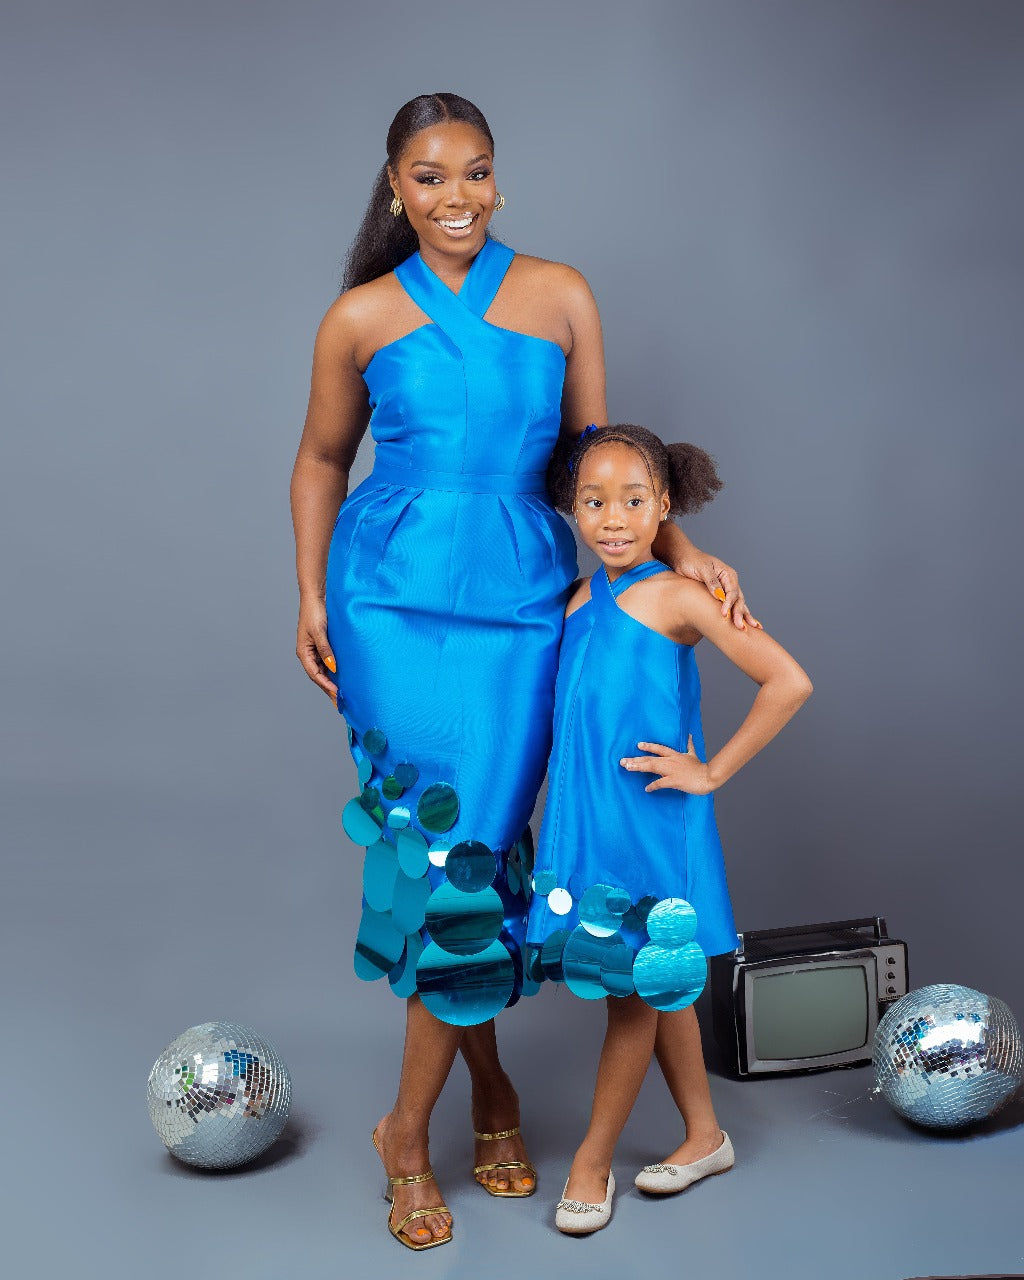 A girl wearing a Turquoise A-line dress with a crisscross neckline and sequins embellishment, and a woman wearing a Turquoise top and skirt with crisscross neckline and pleat details at the waist with sequins embellishment